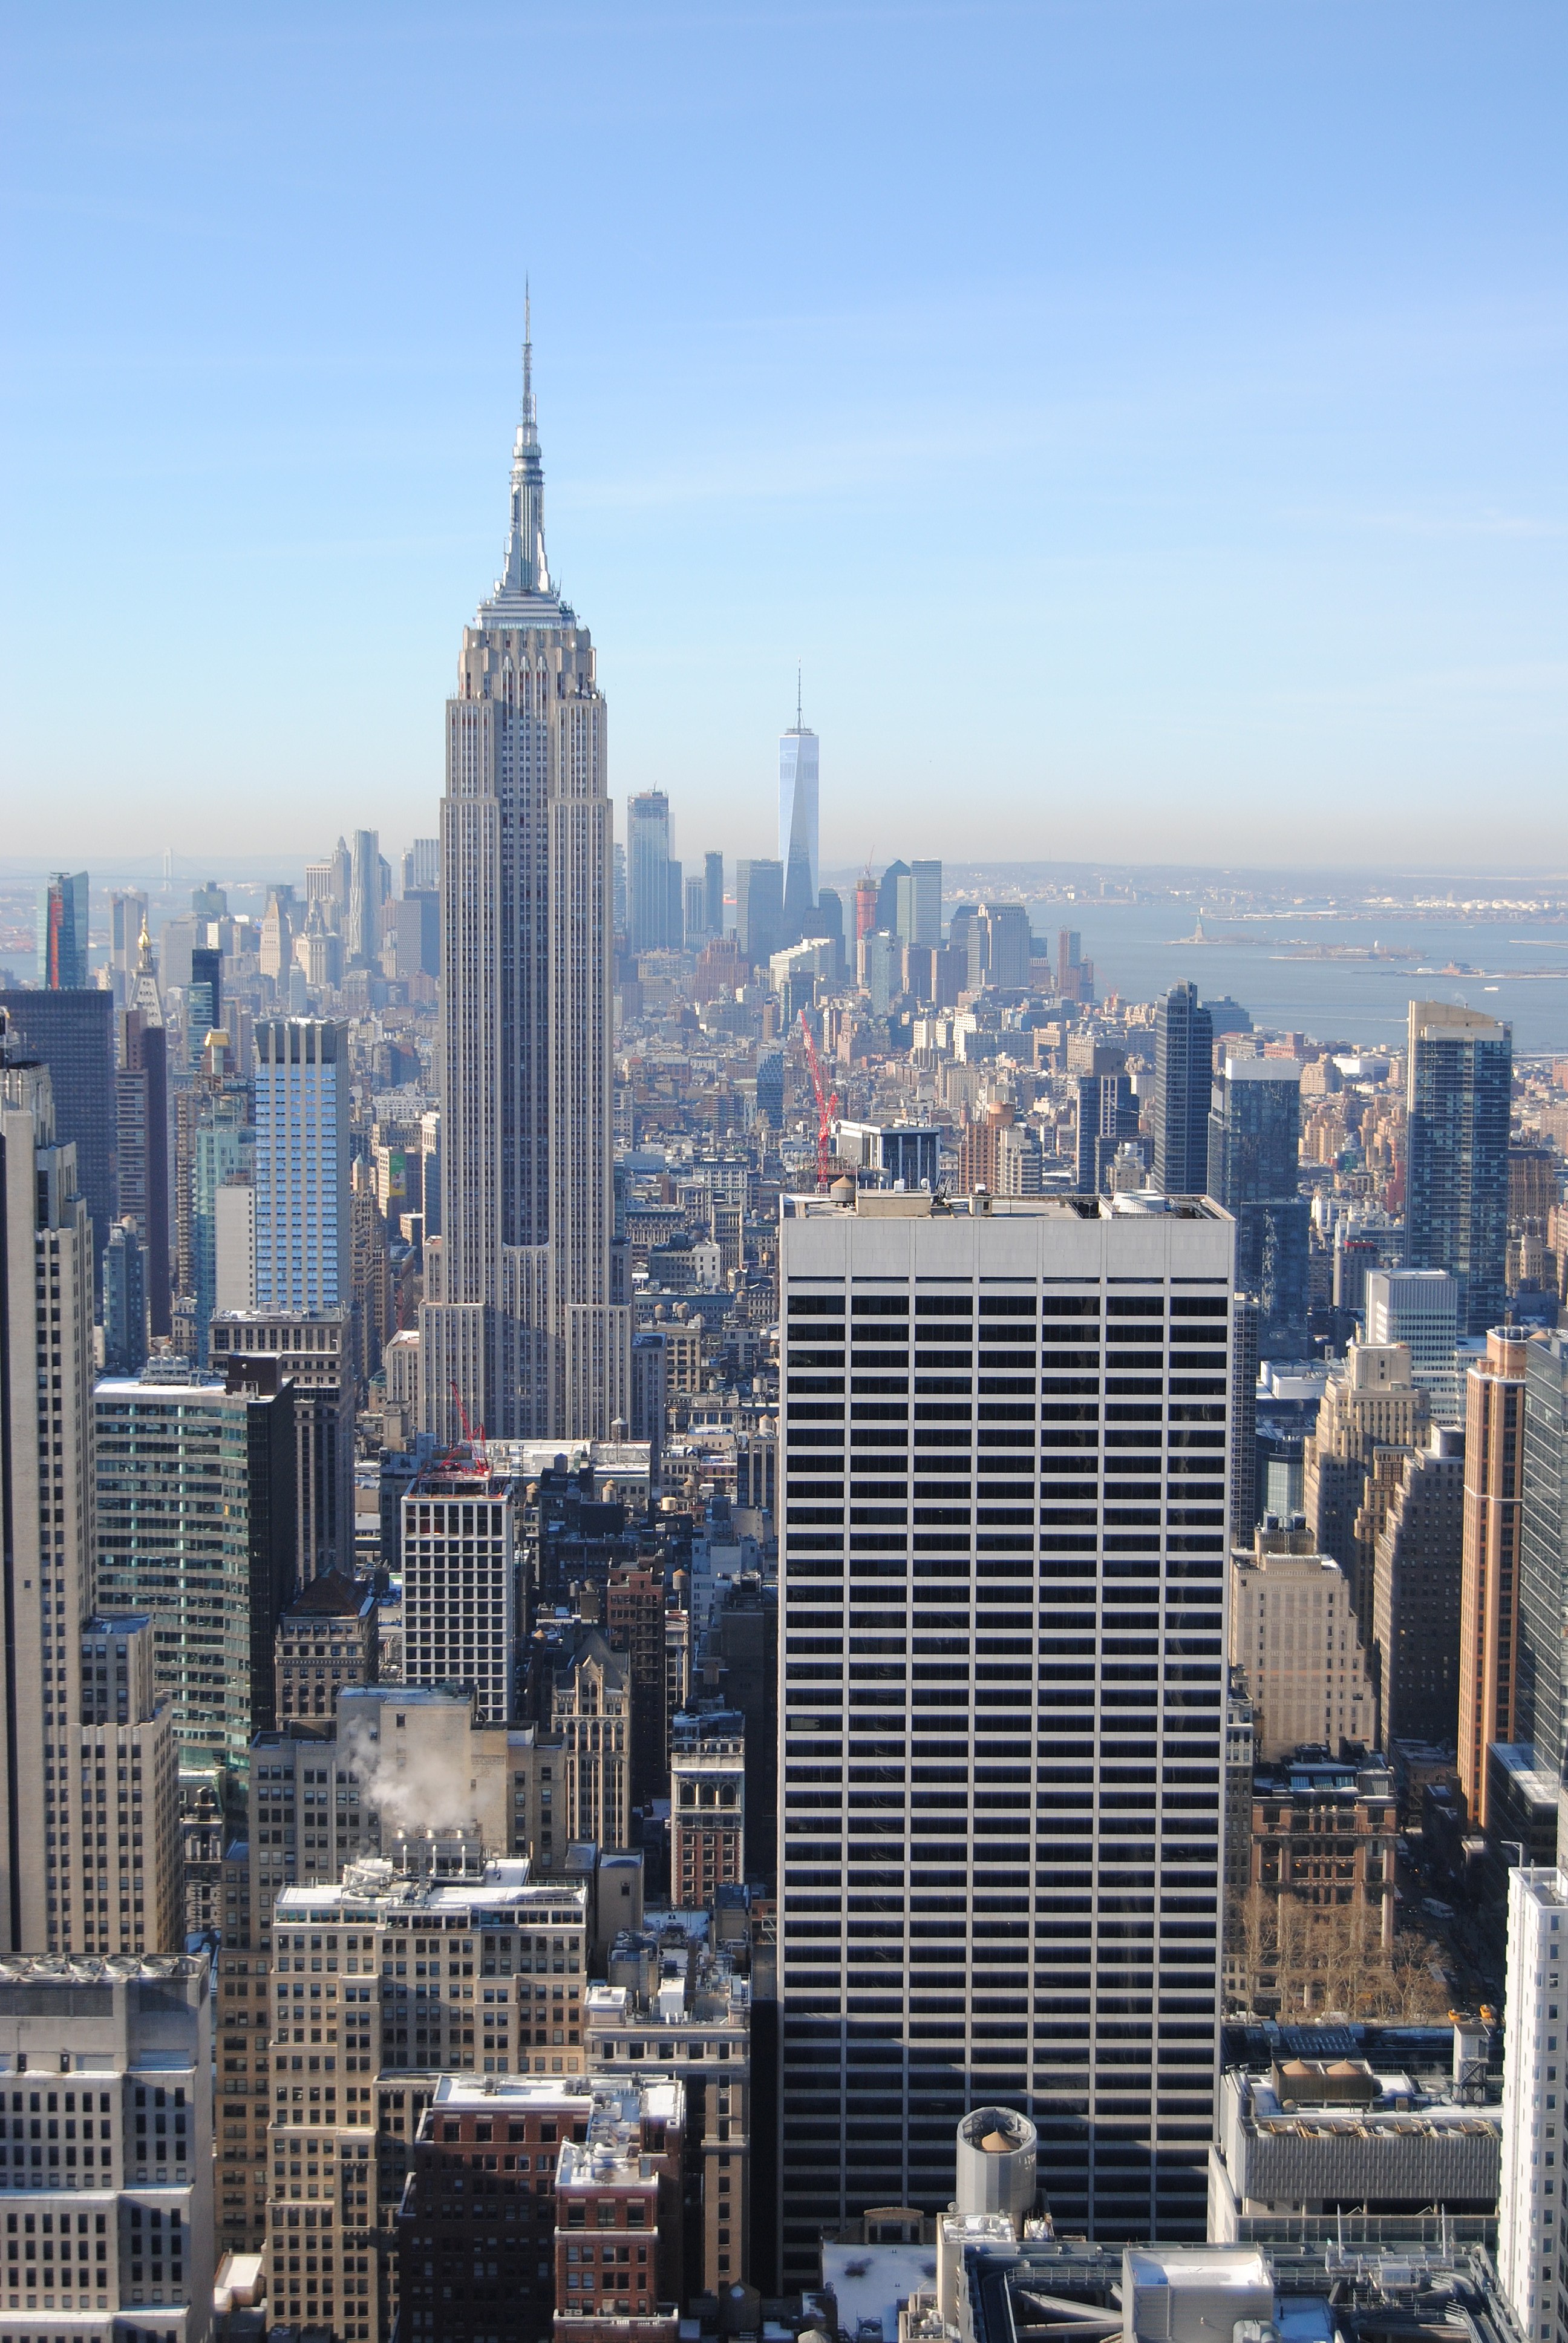 File:Empire State Building from a  - Wikimedia Commons